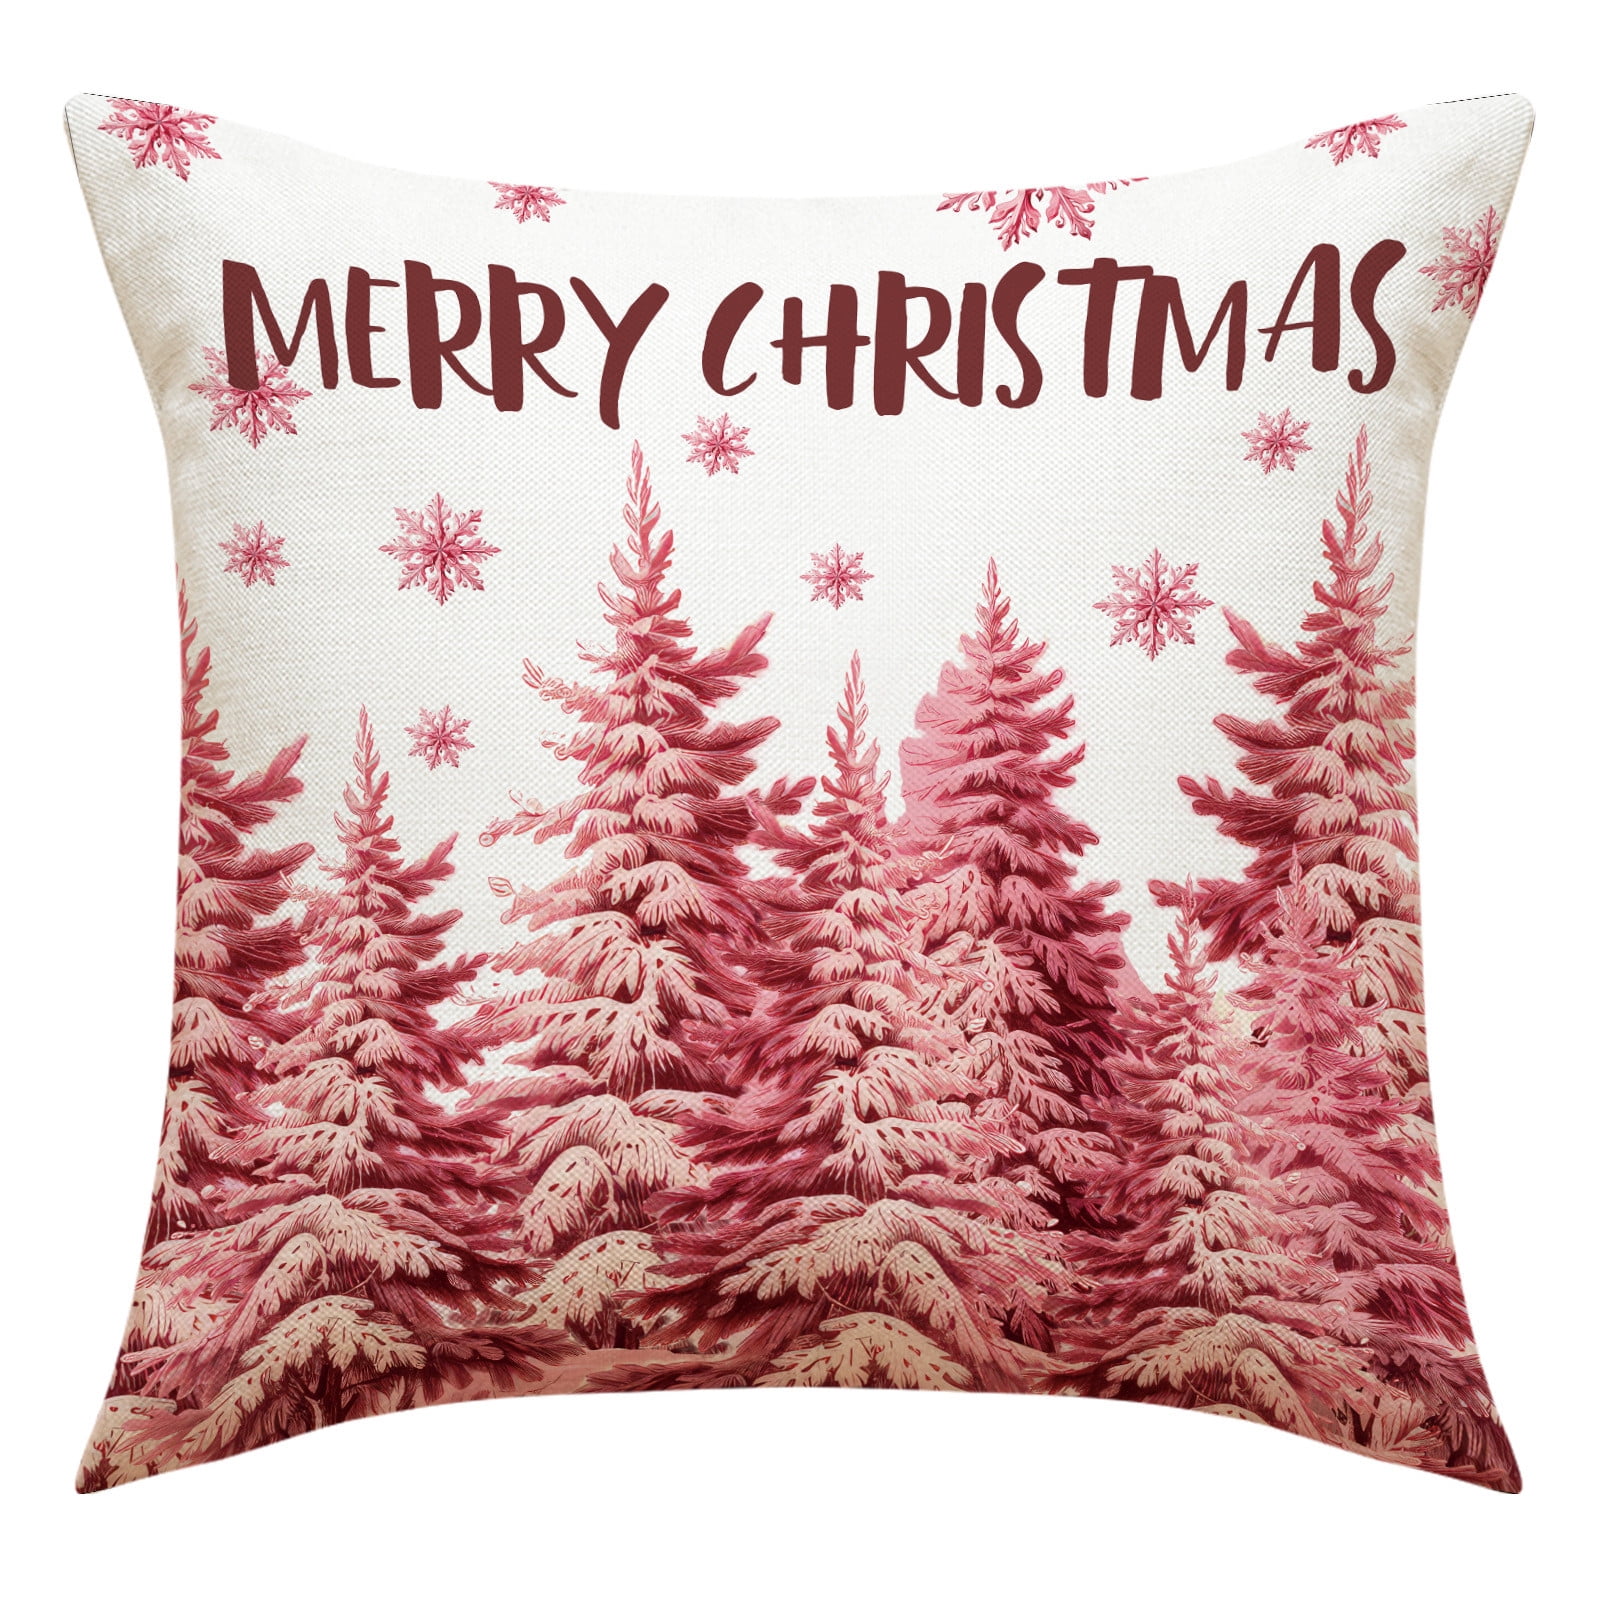 1pc Christmas Throw Pillow Cover With Burlap Fabric, Embroidered Christmas  Tree And Bow